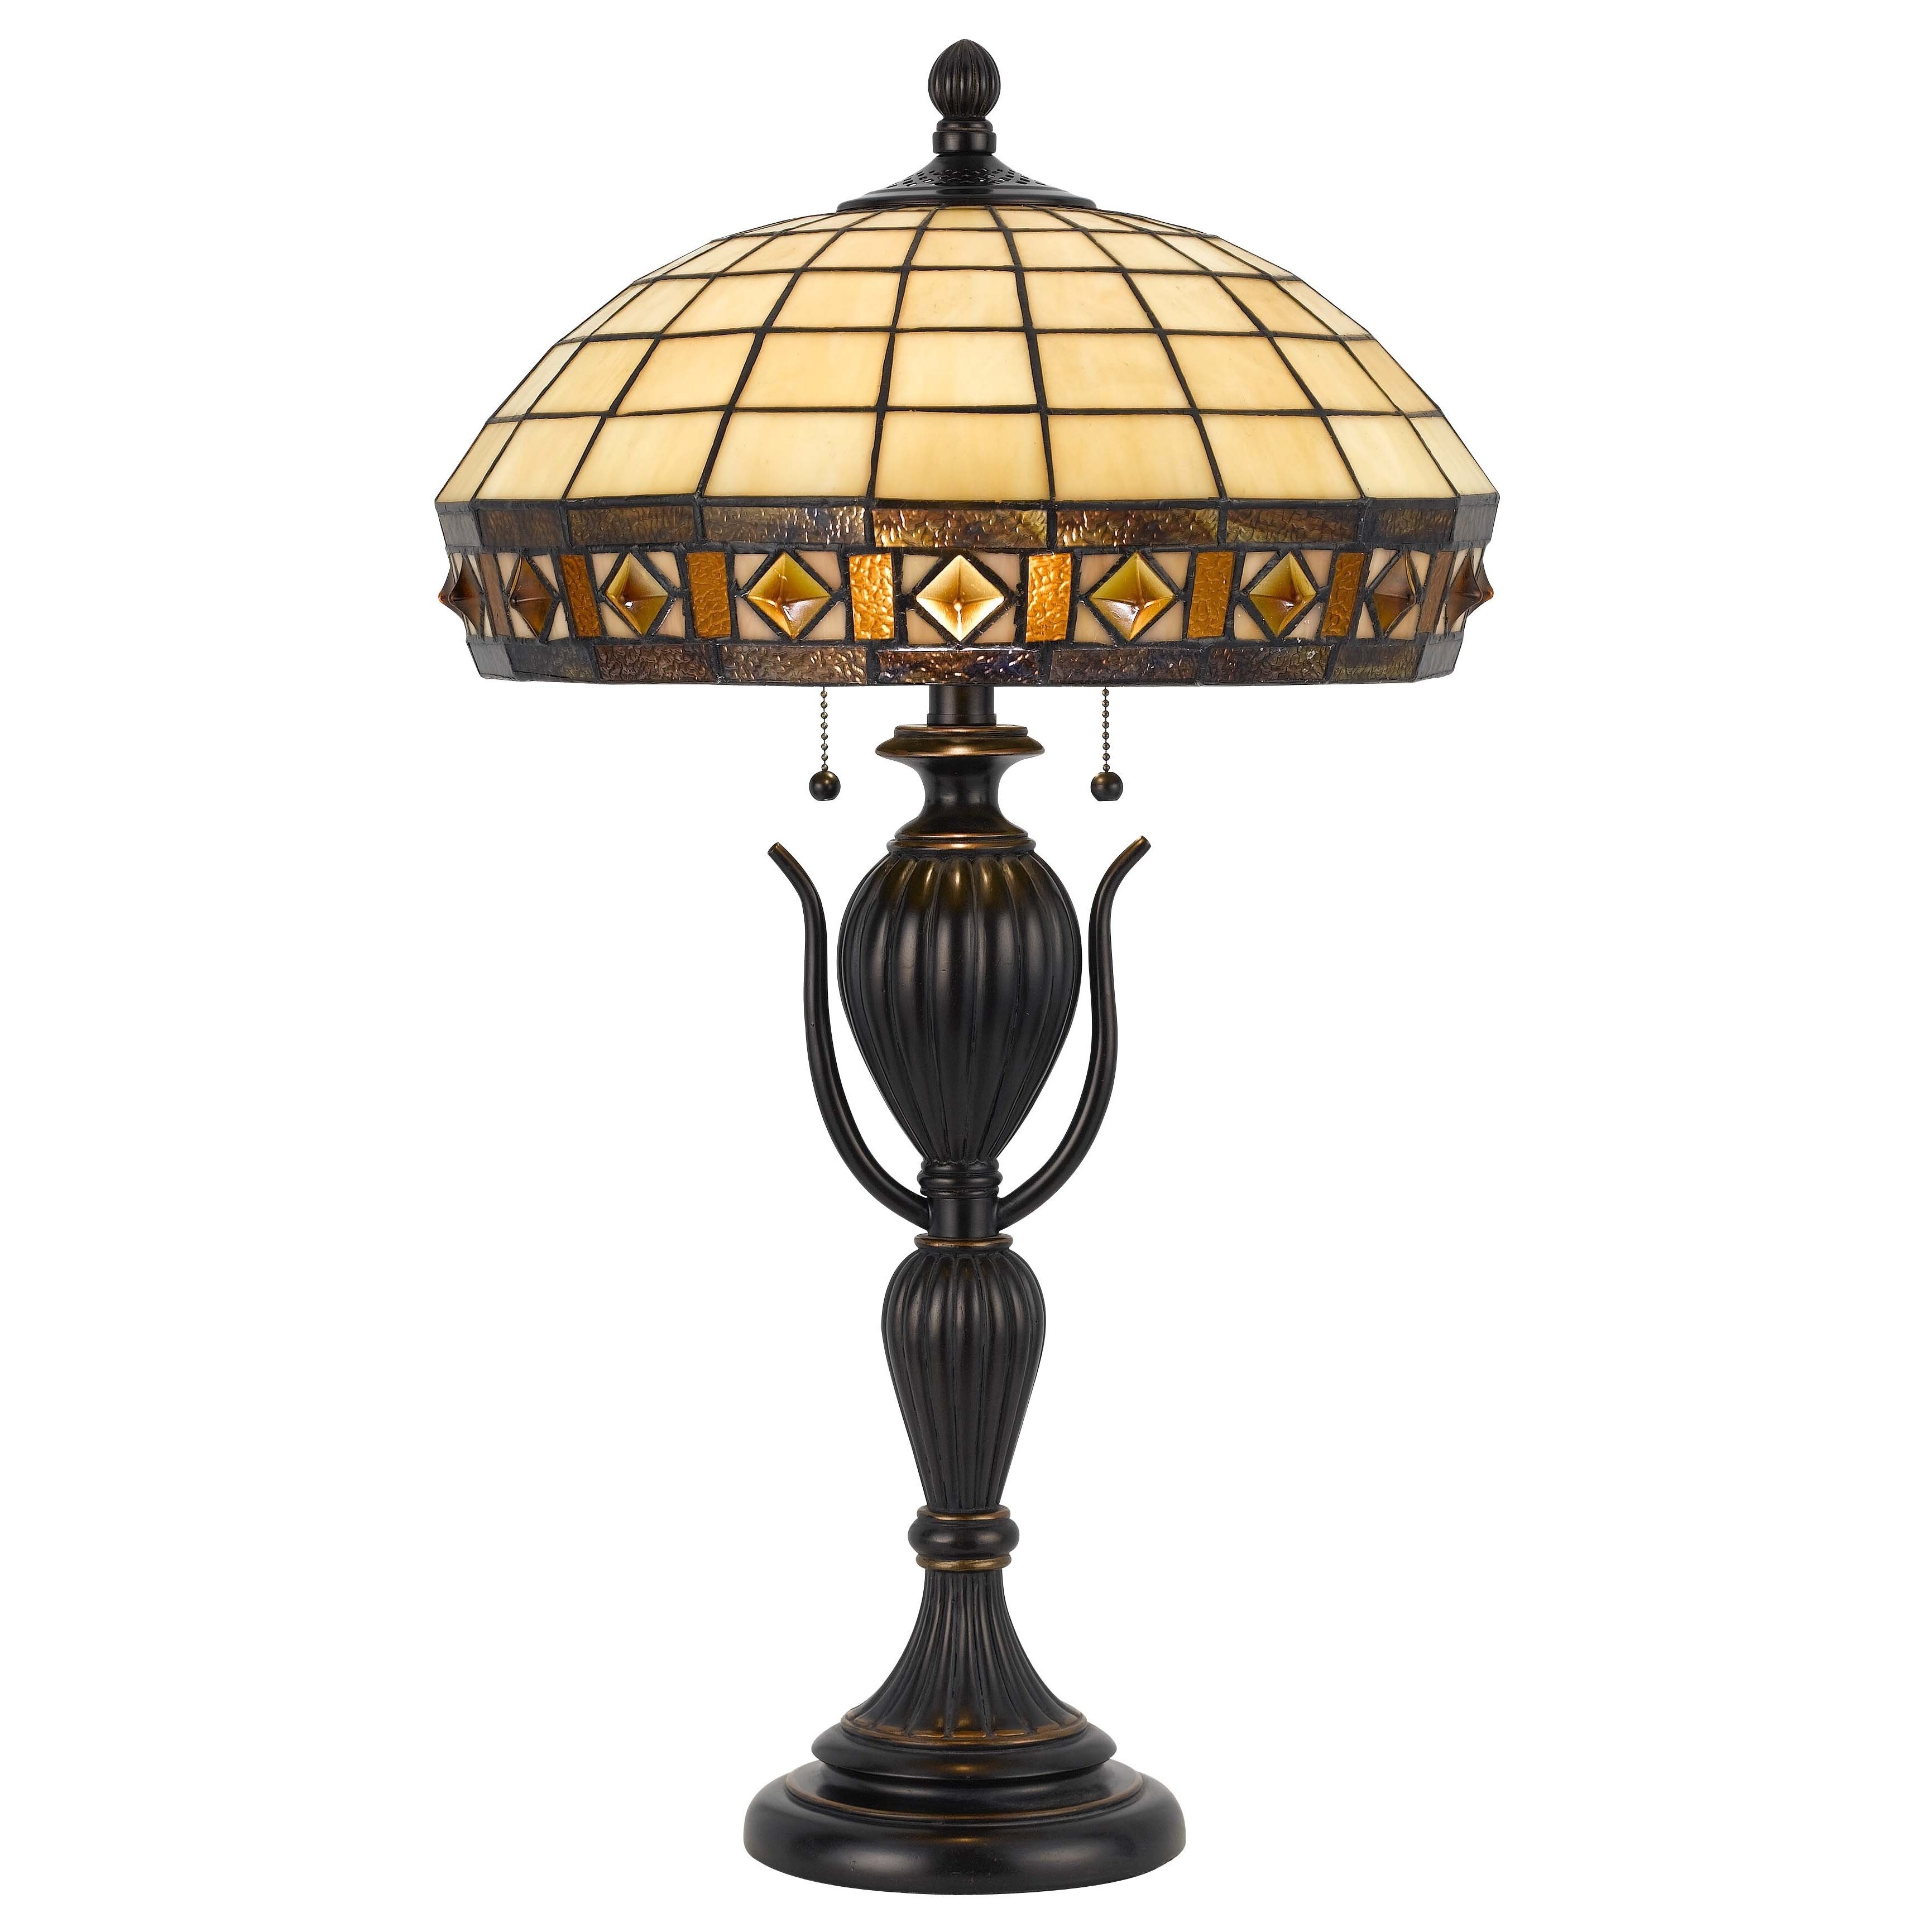 Cal Lighting Tiffany Dark Bronze Table Lamp (Metal/ glassFixture finish Dark bronzeOn/off switchNumber of lights Two (2)Requires Two (2) 60 watt CFL fluorescent or regular bulbs (not included)Dimensions 27.5 inches high x 16 inches wideShade dimension